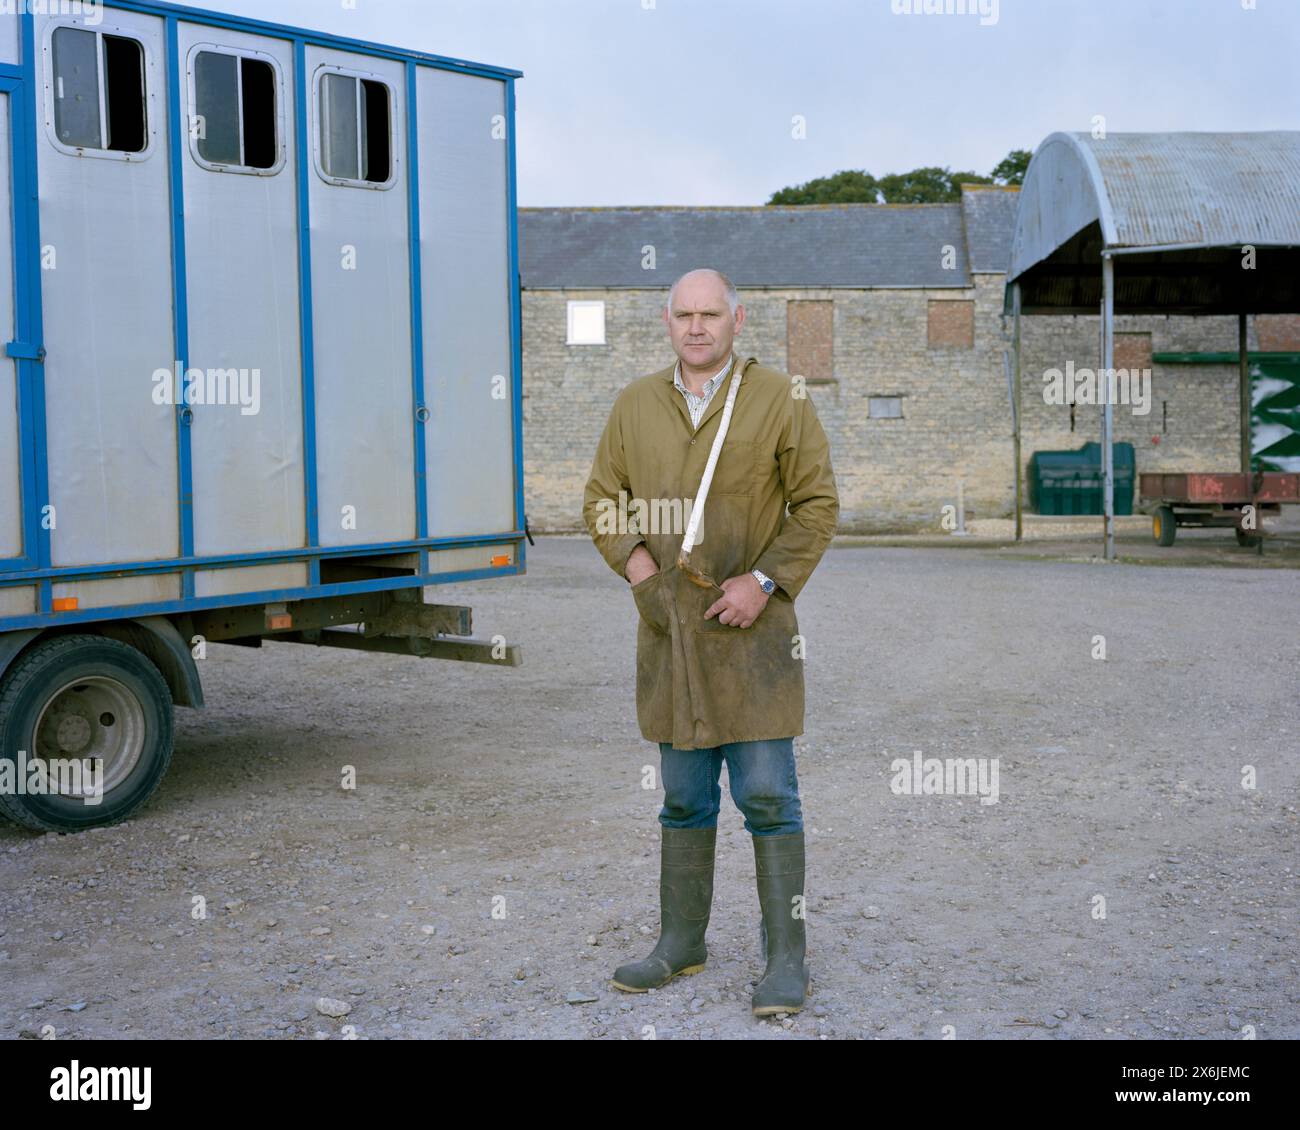 © John Angerson Leicester -England. James Stenton - The Whipper-In. Eastfield Farm Kennels, Leicester -England. Since the 2004 Hunting Act outlawed hu Stock Photo